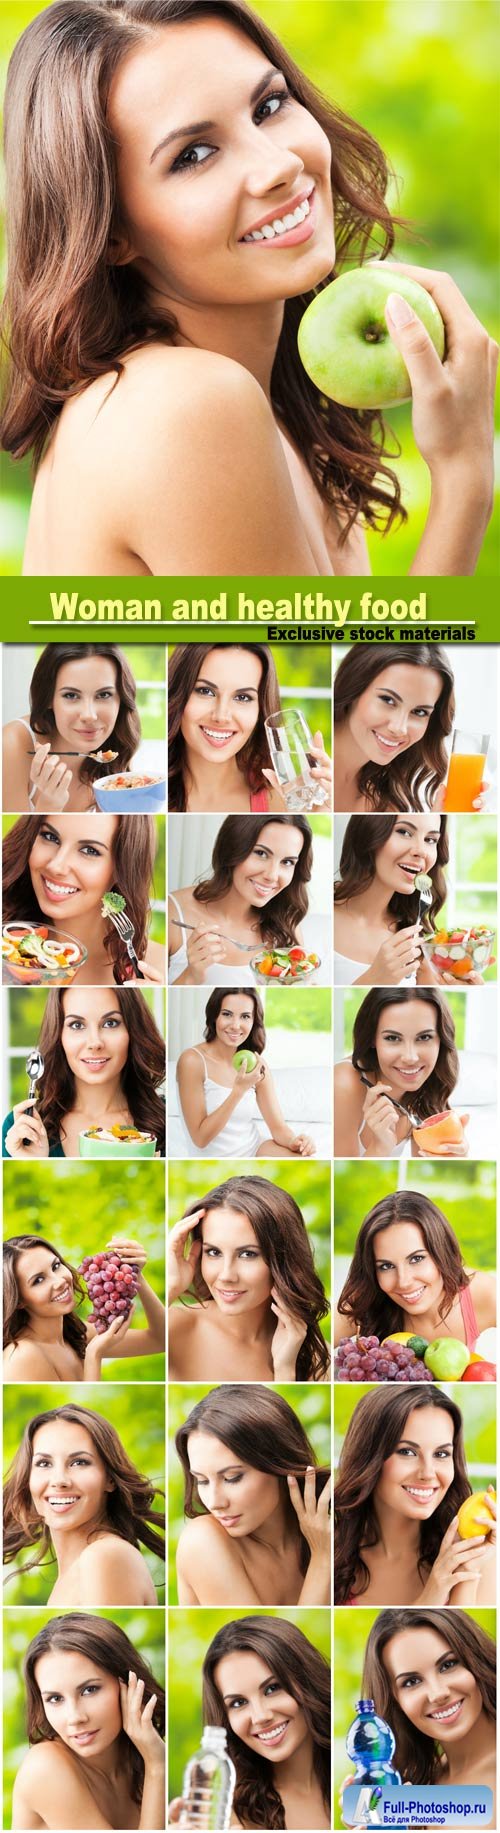 Beautiful woman and healthy food